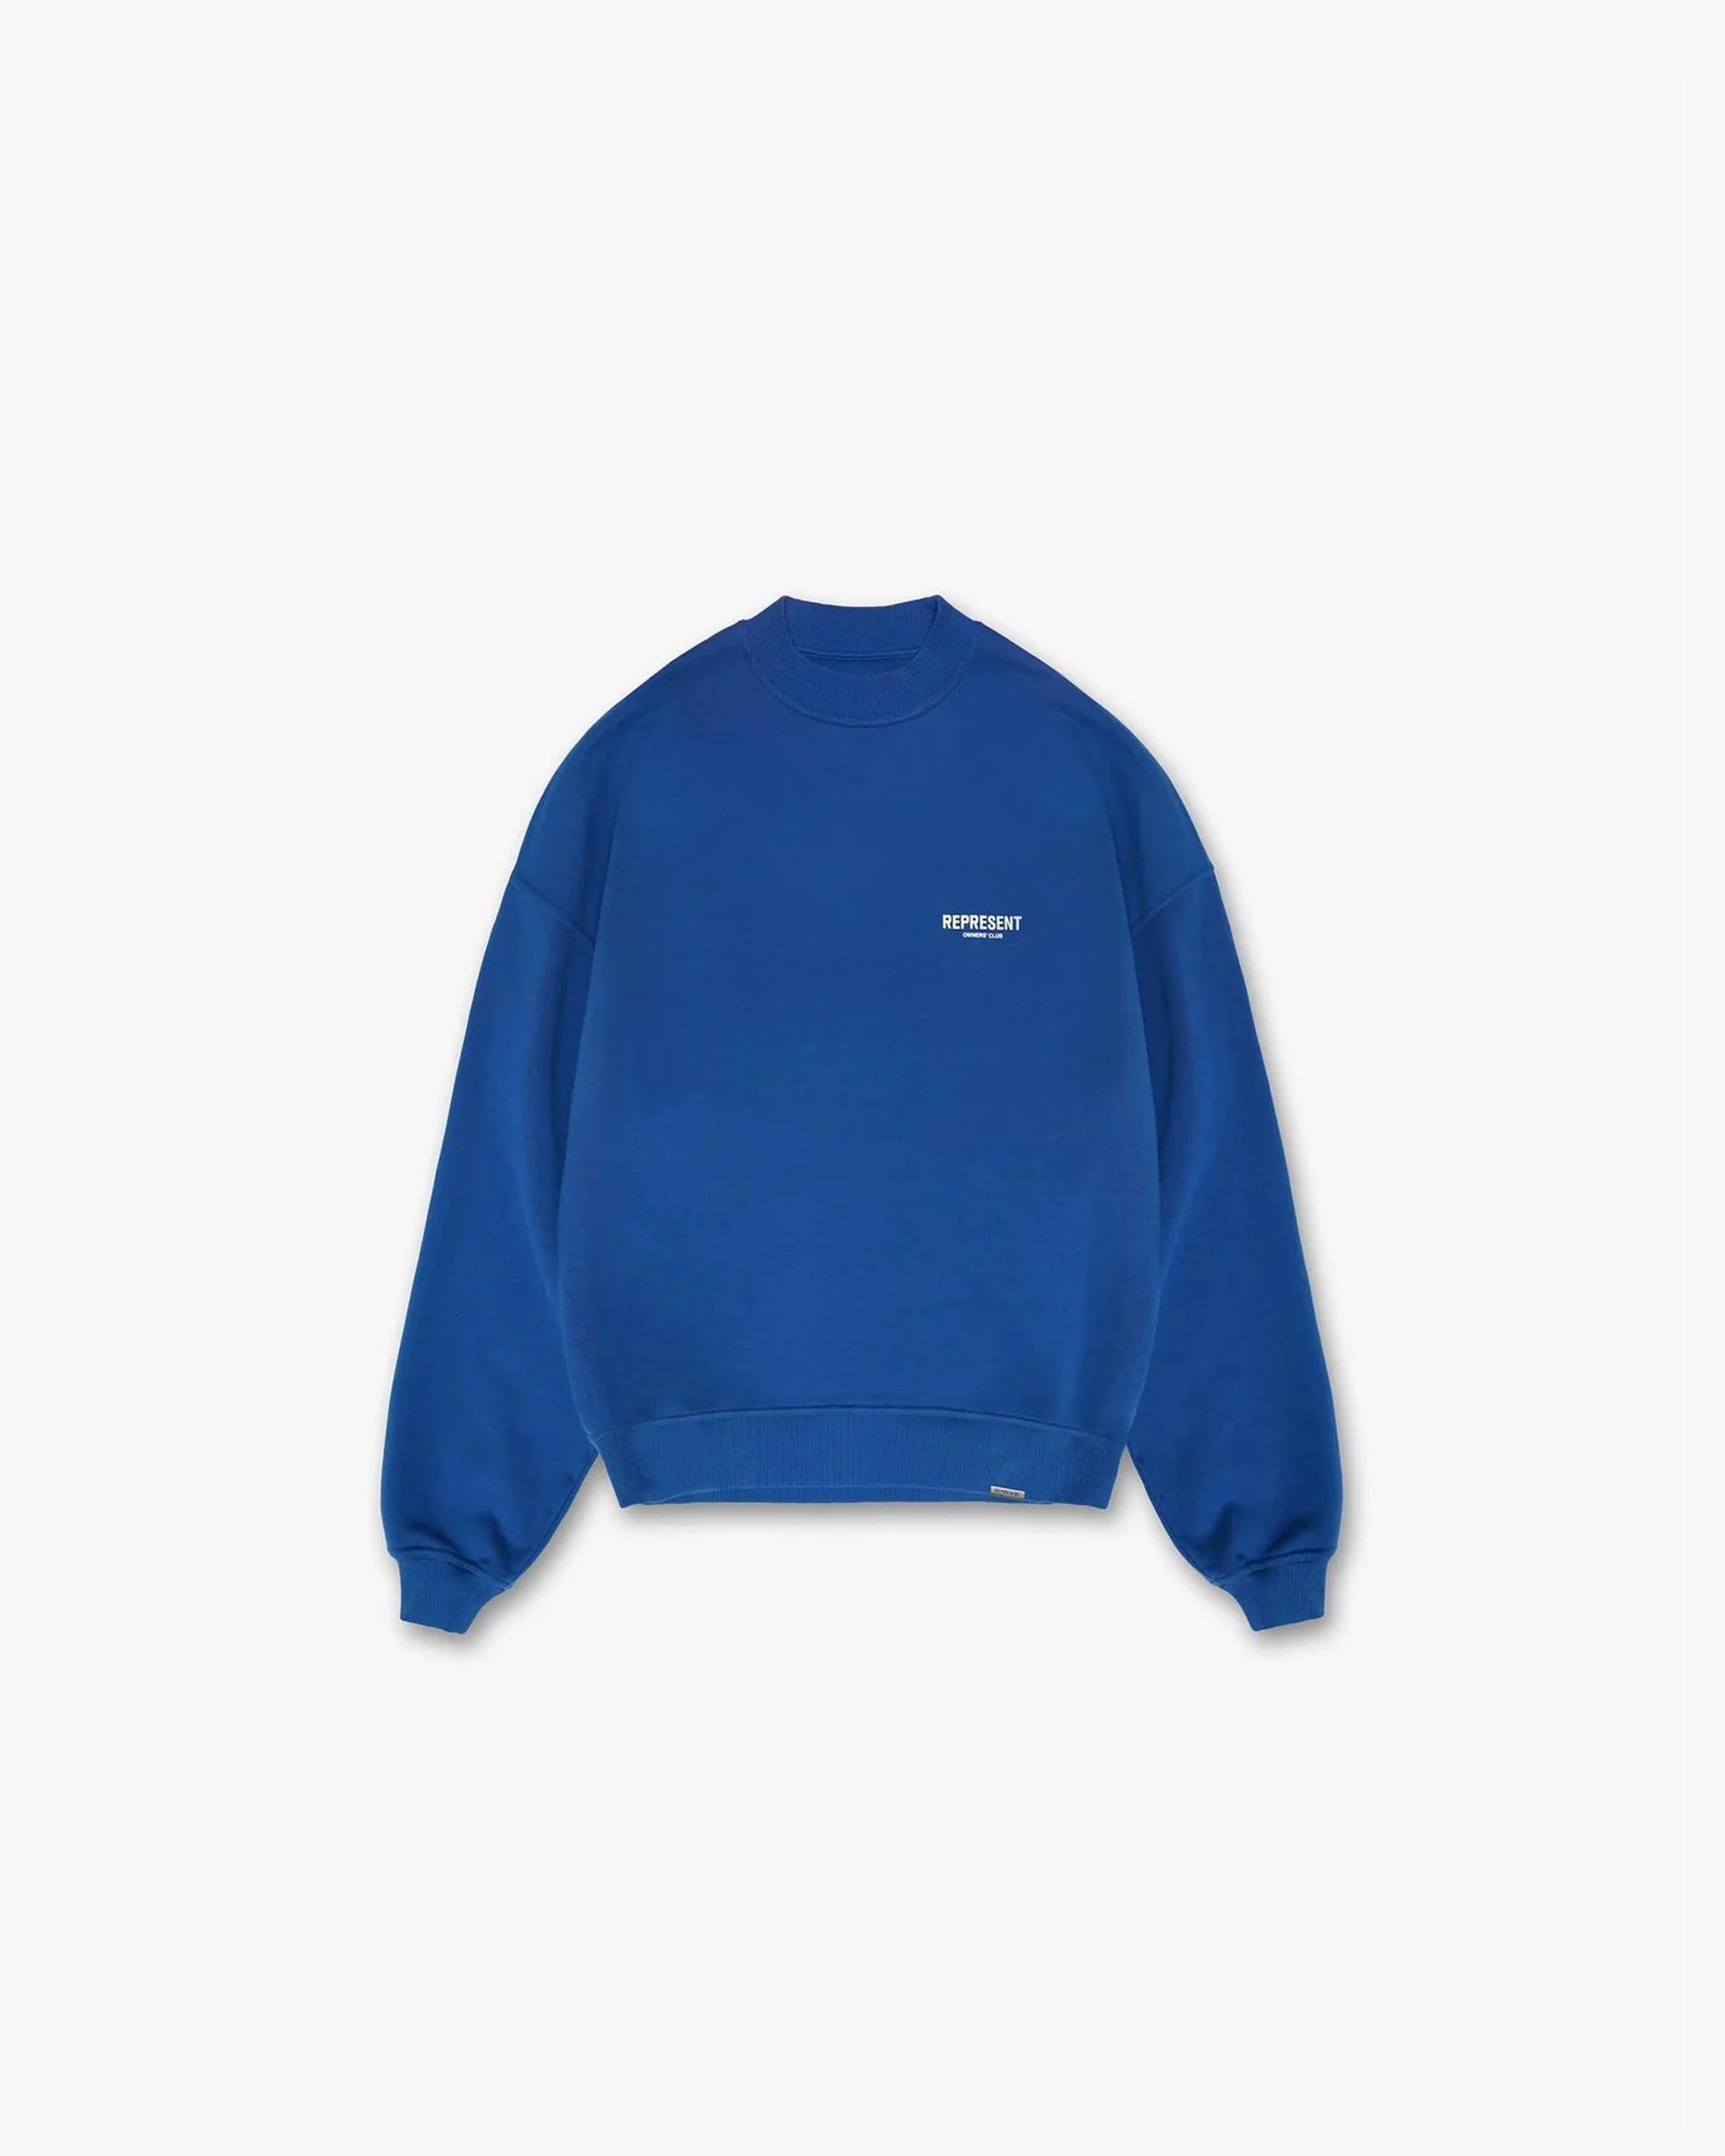 Represent Owners Club Sweater | Cobalt Sweaters Owners Club | Represent Clo